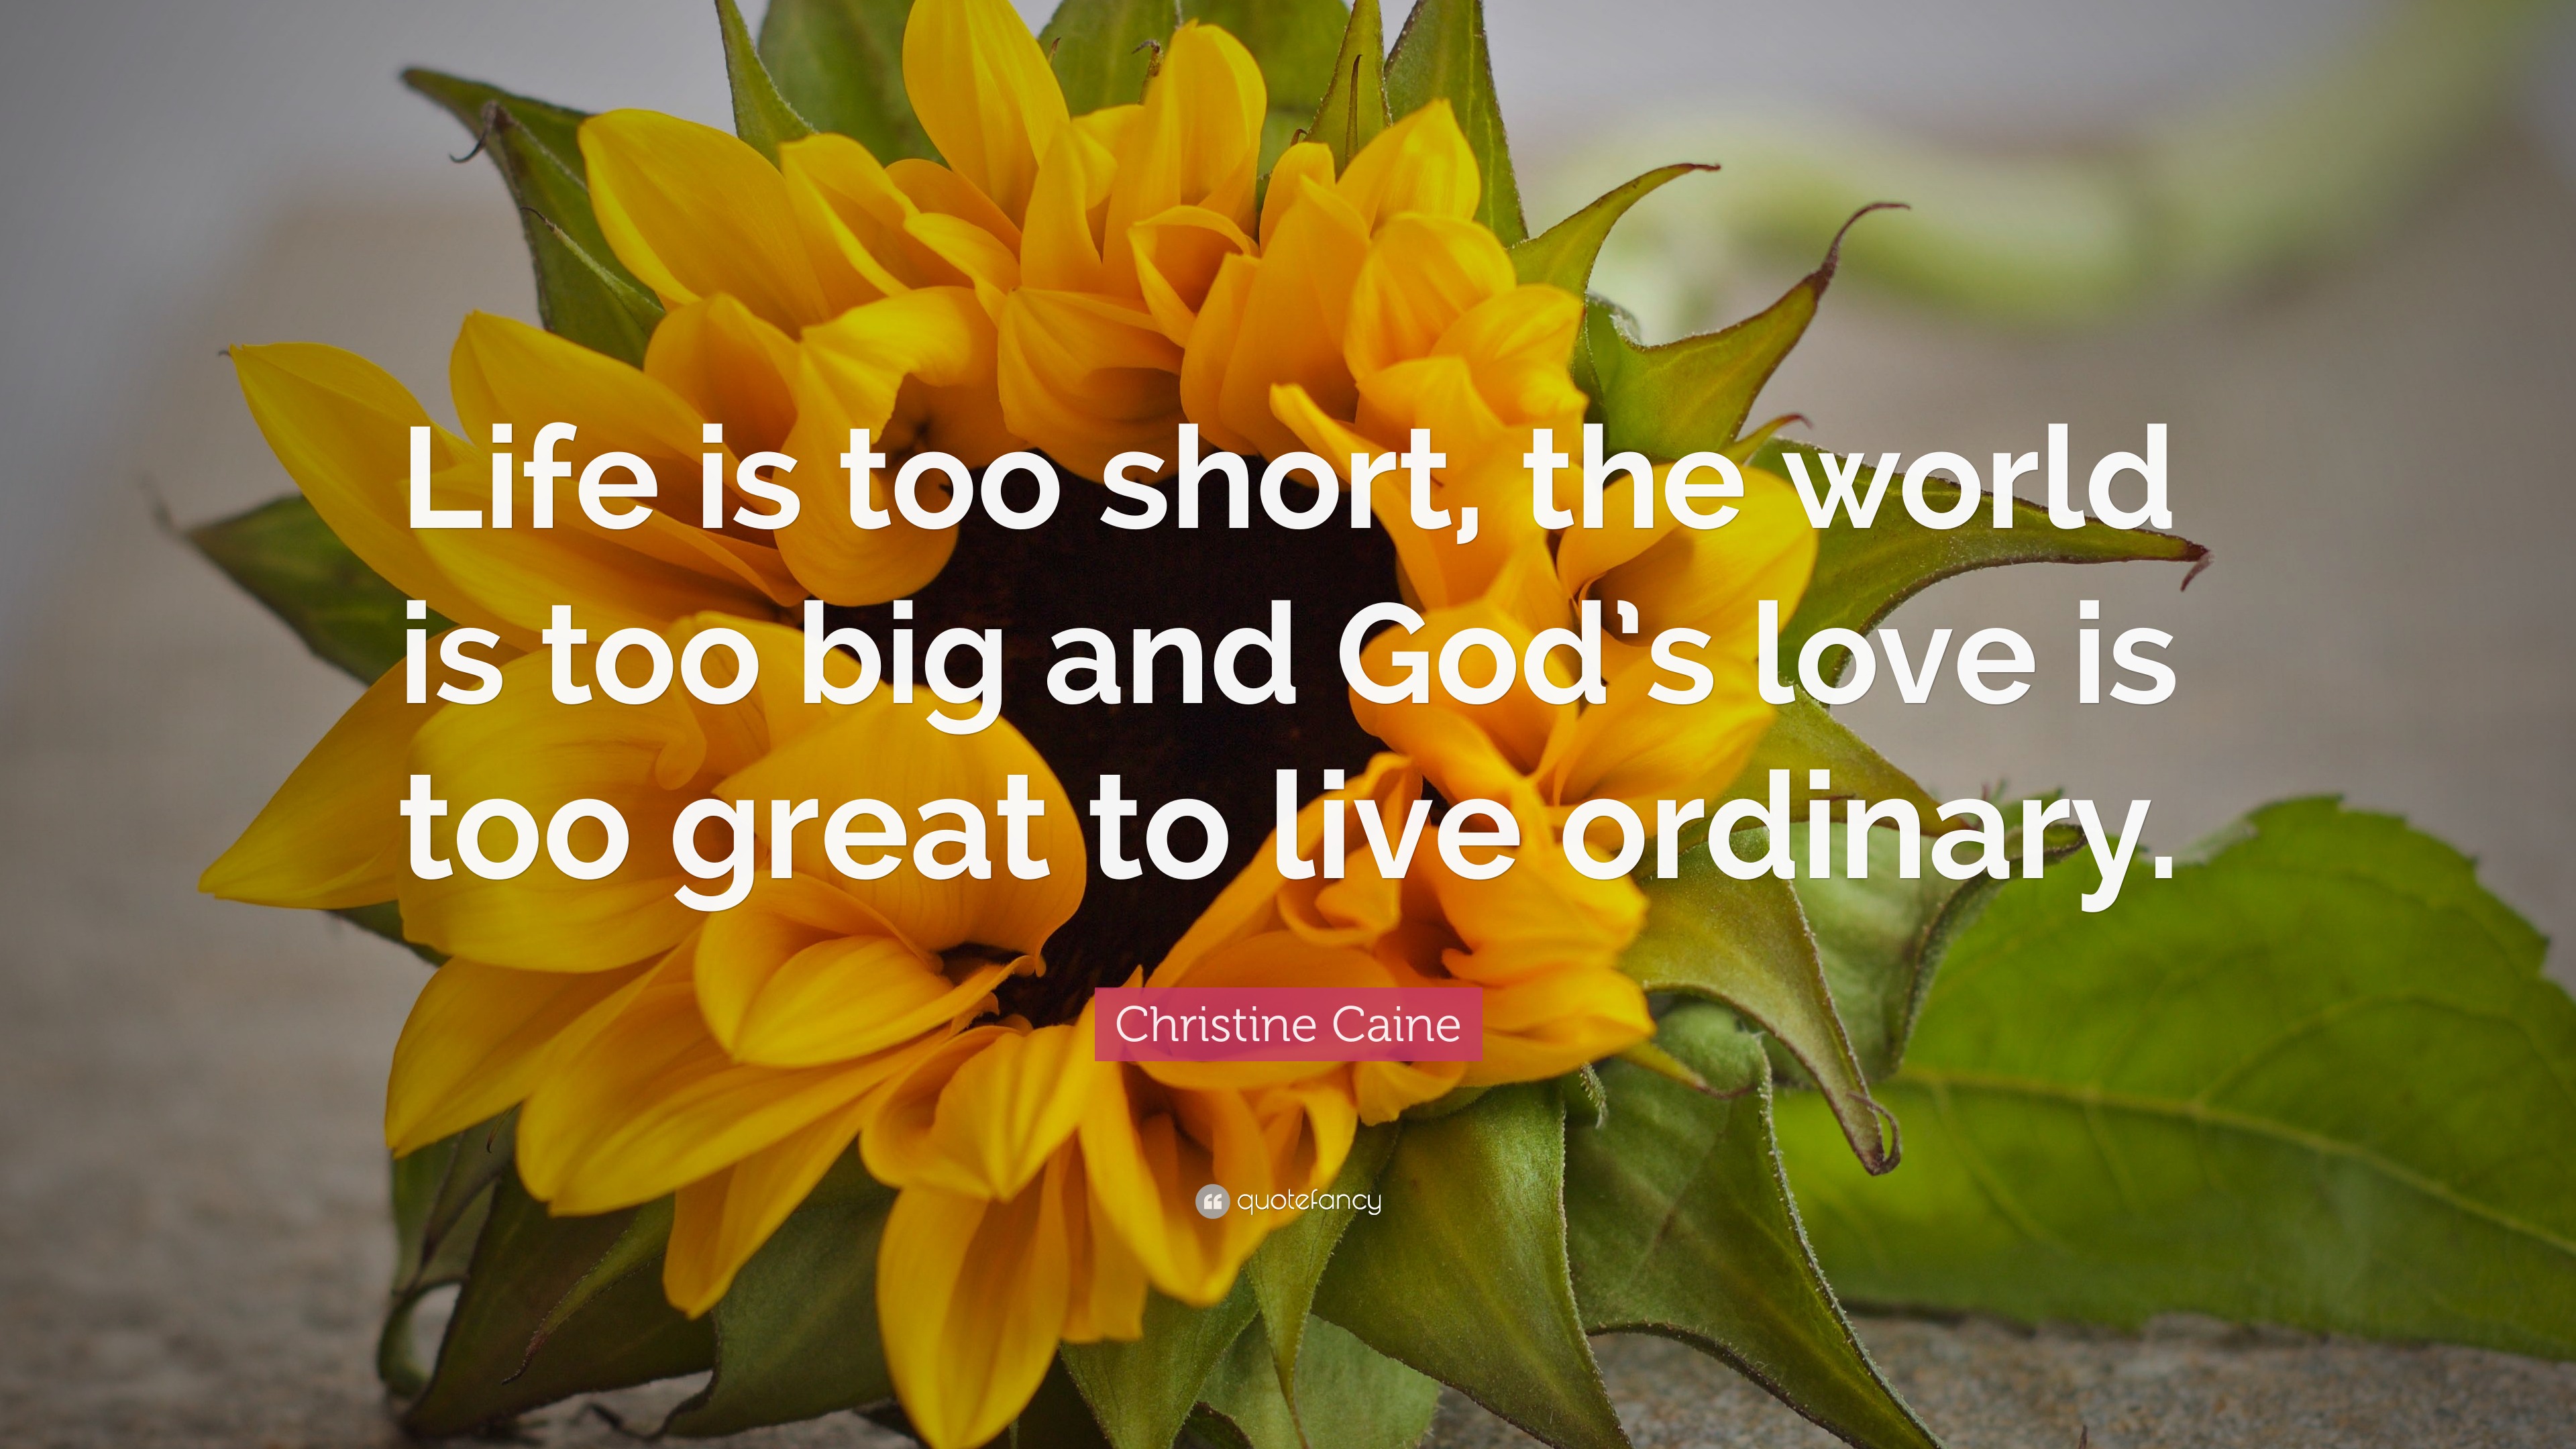 Christine Caine Quote: “Life is too short, the world is too big and God's  love is